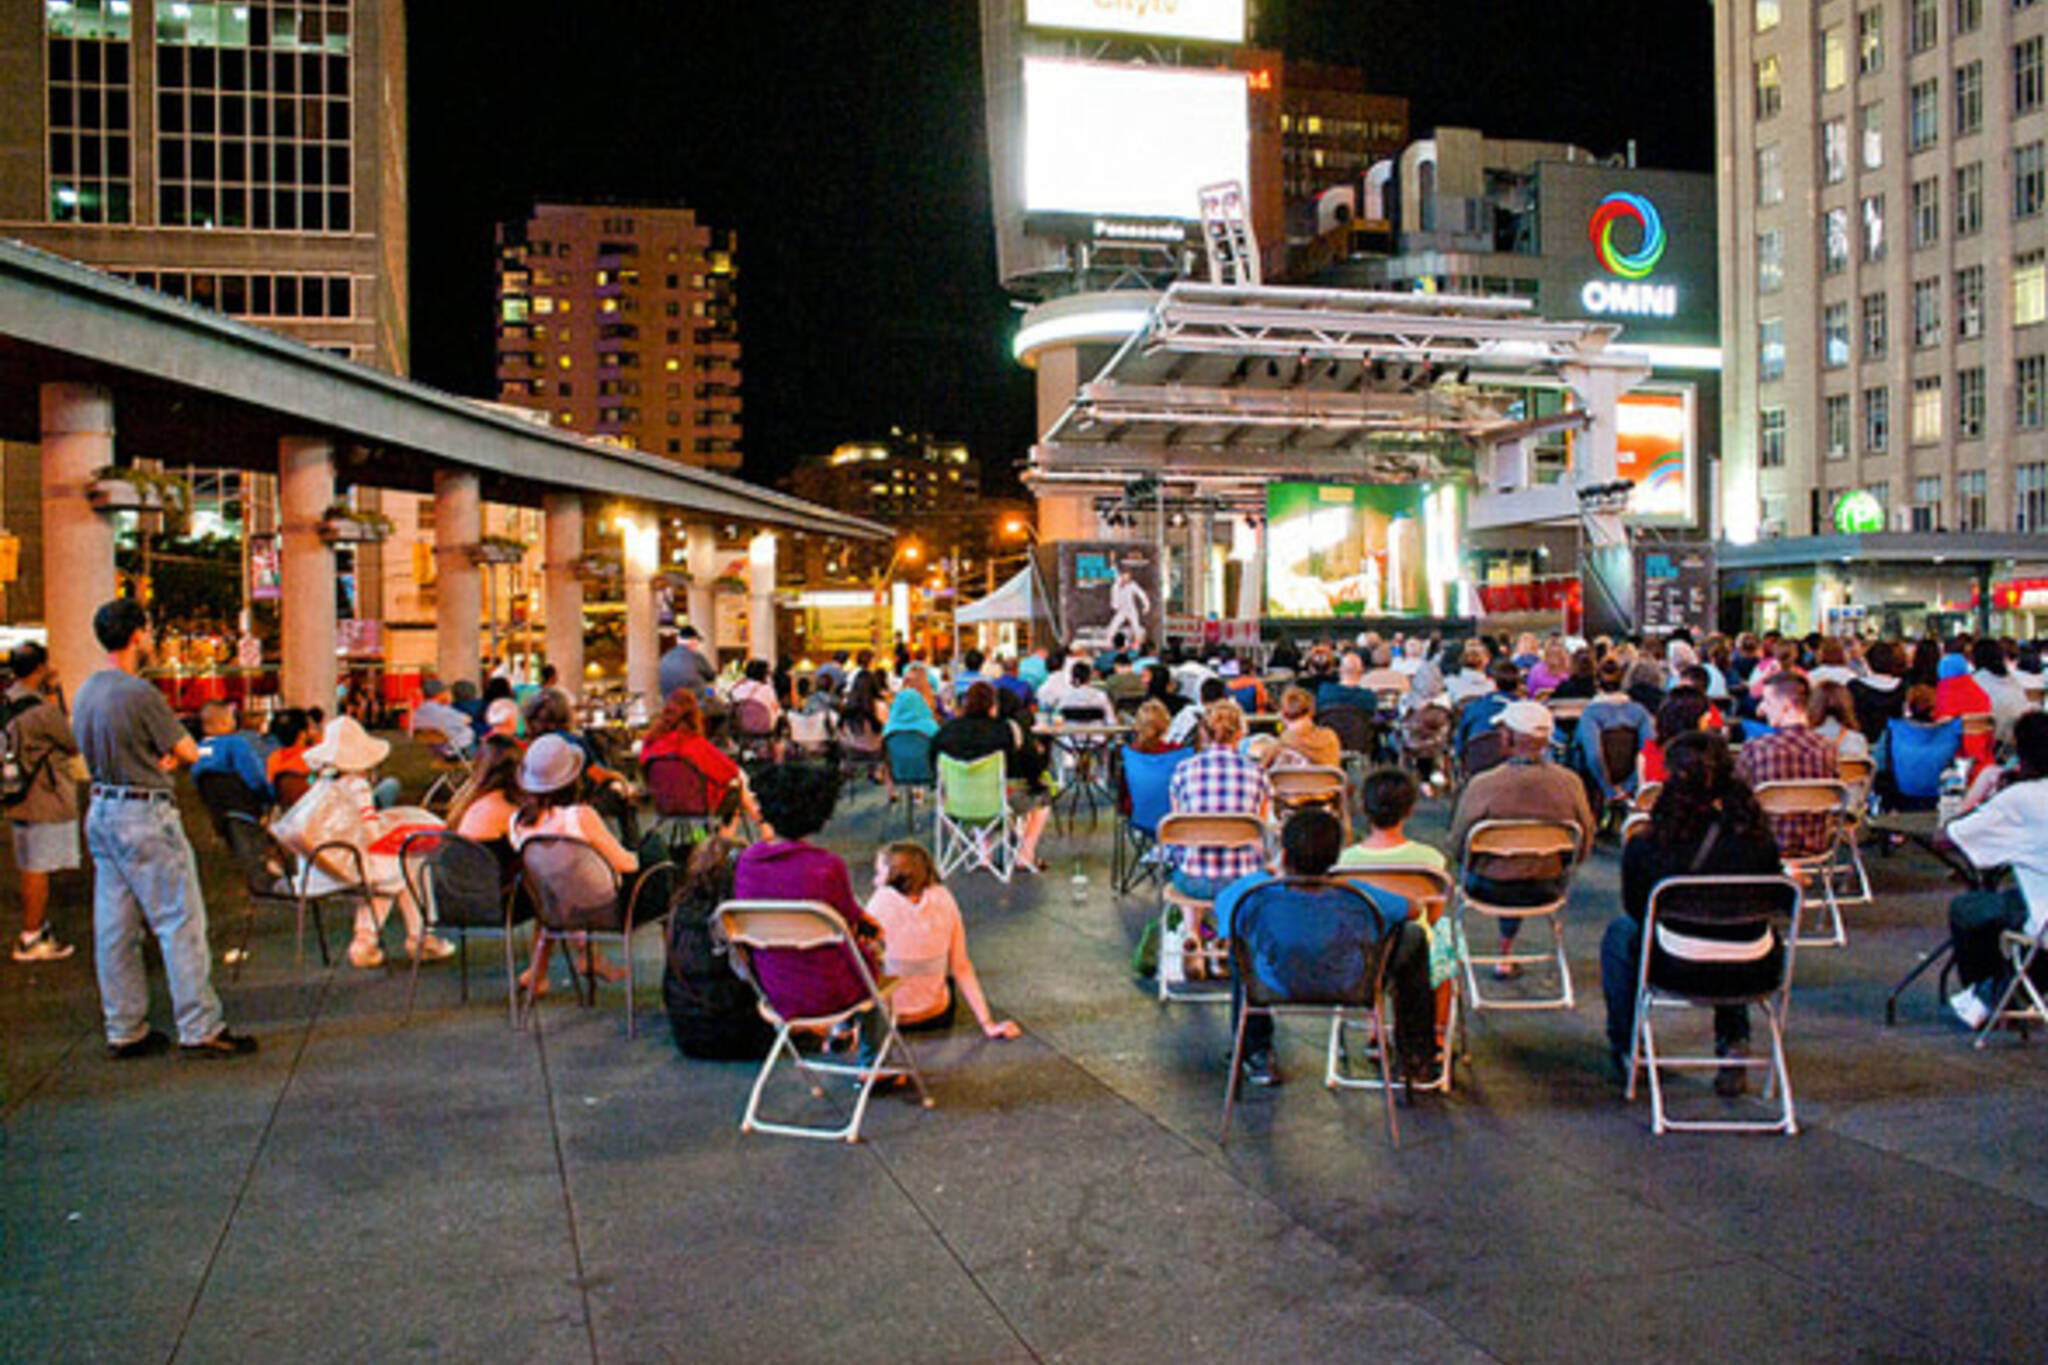 Free outdoor movies in Toronto summer 2012